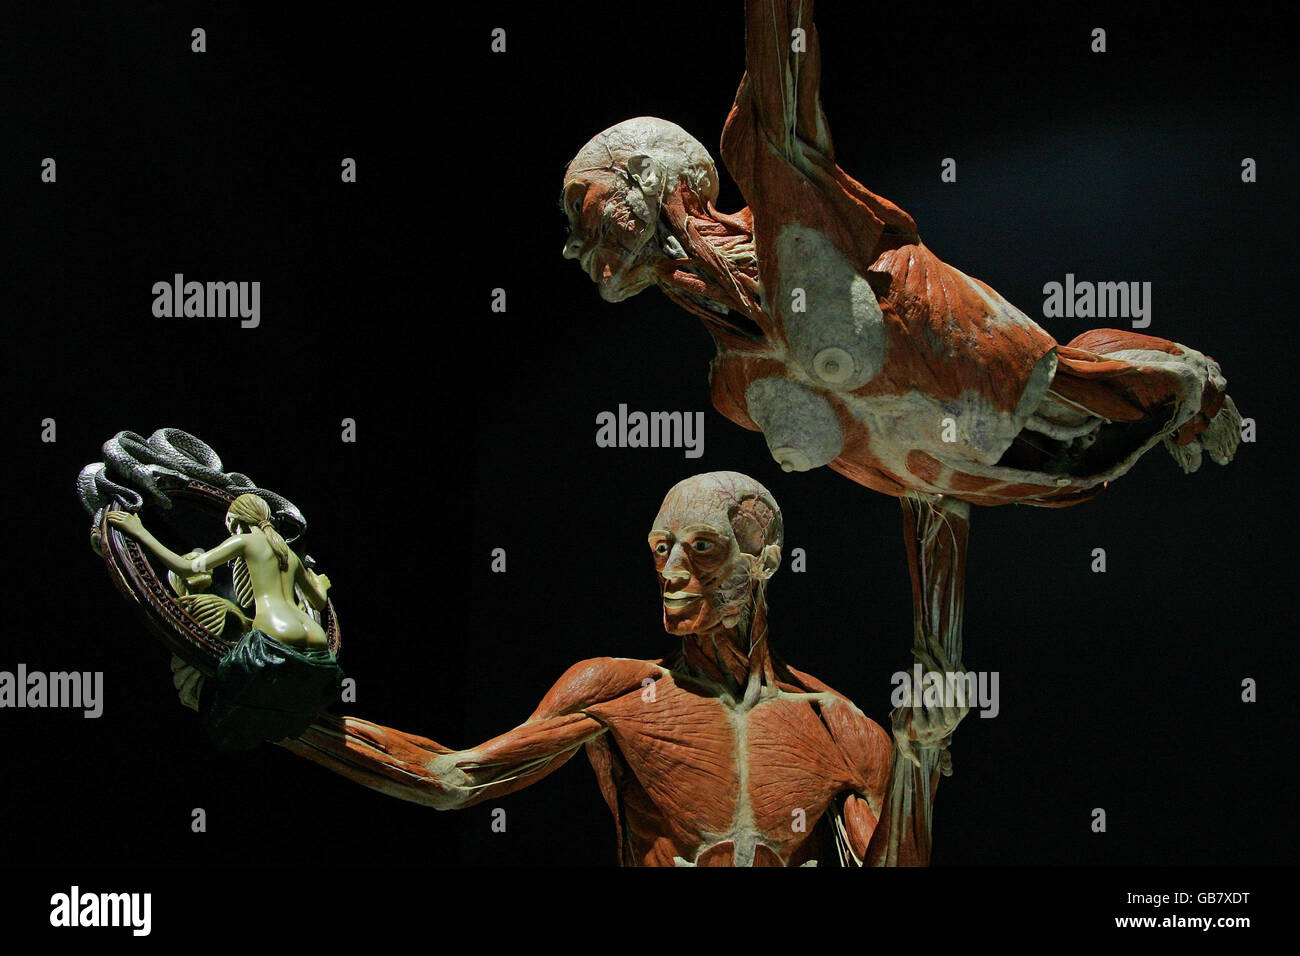 Body Worlds & The Mirror of Time exhibition Stock Photo